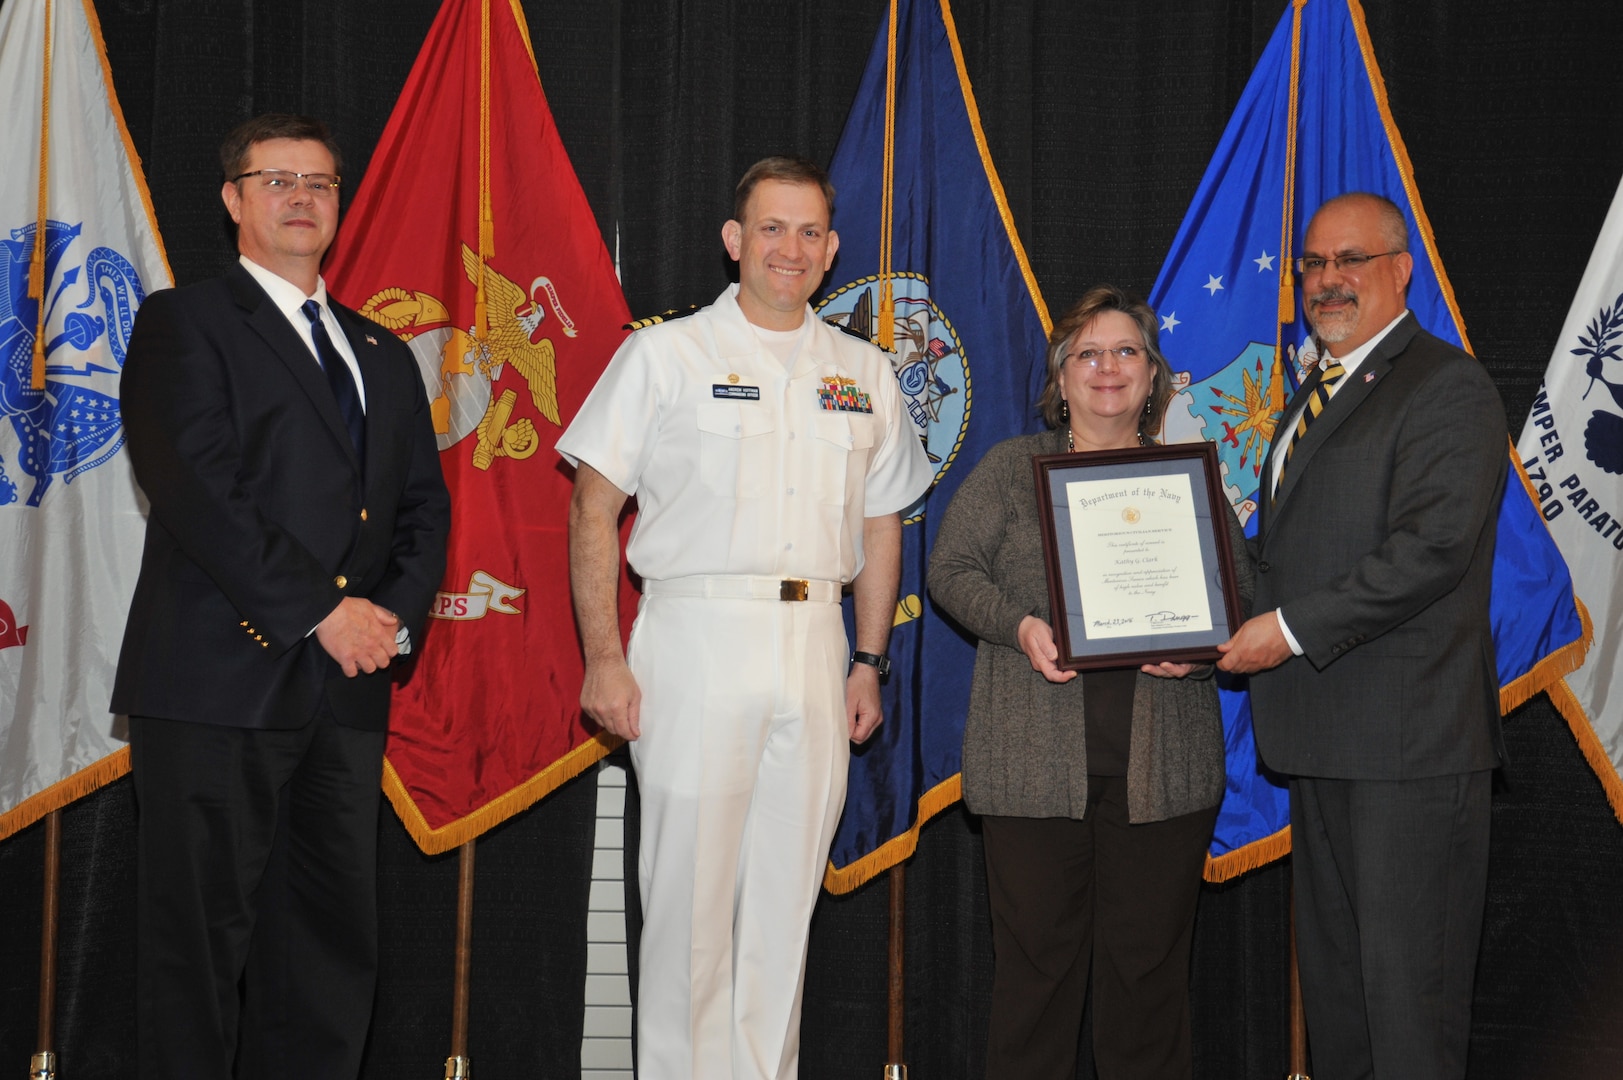 IMAGE: Kathy Clark is presented the Navy Meritorious Civilian Service Award at Naval Surface Warfare Center Dahlgren Division's annual awards ceremony, Apr. 26 at the Fredericksburg Expo and Conference Center.